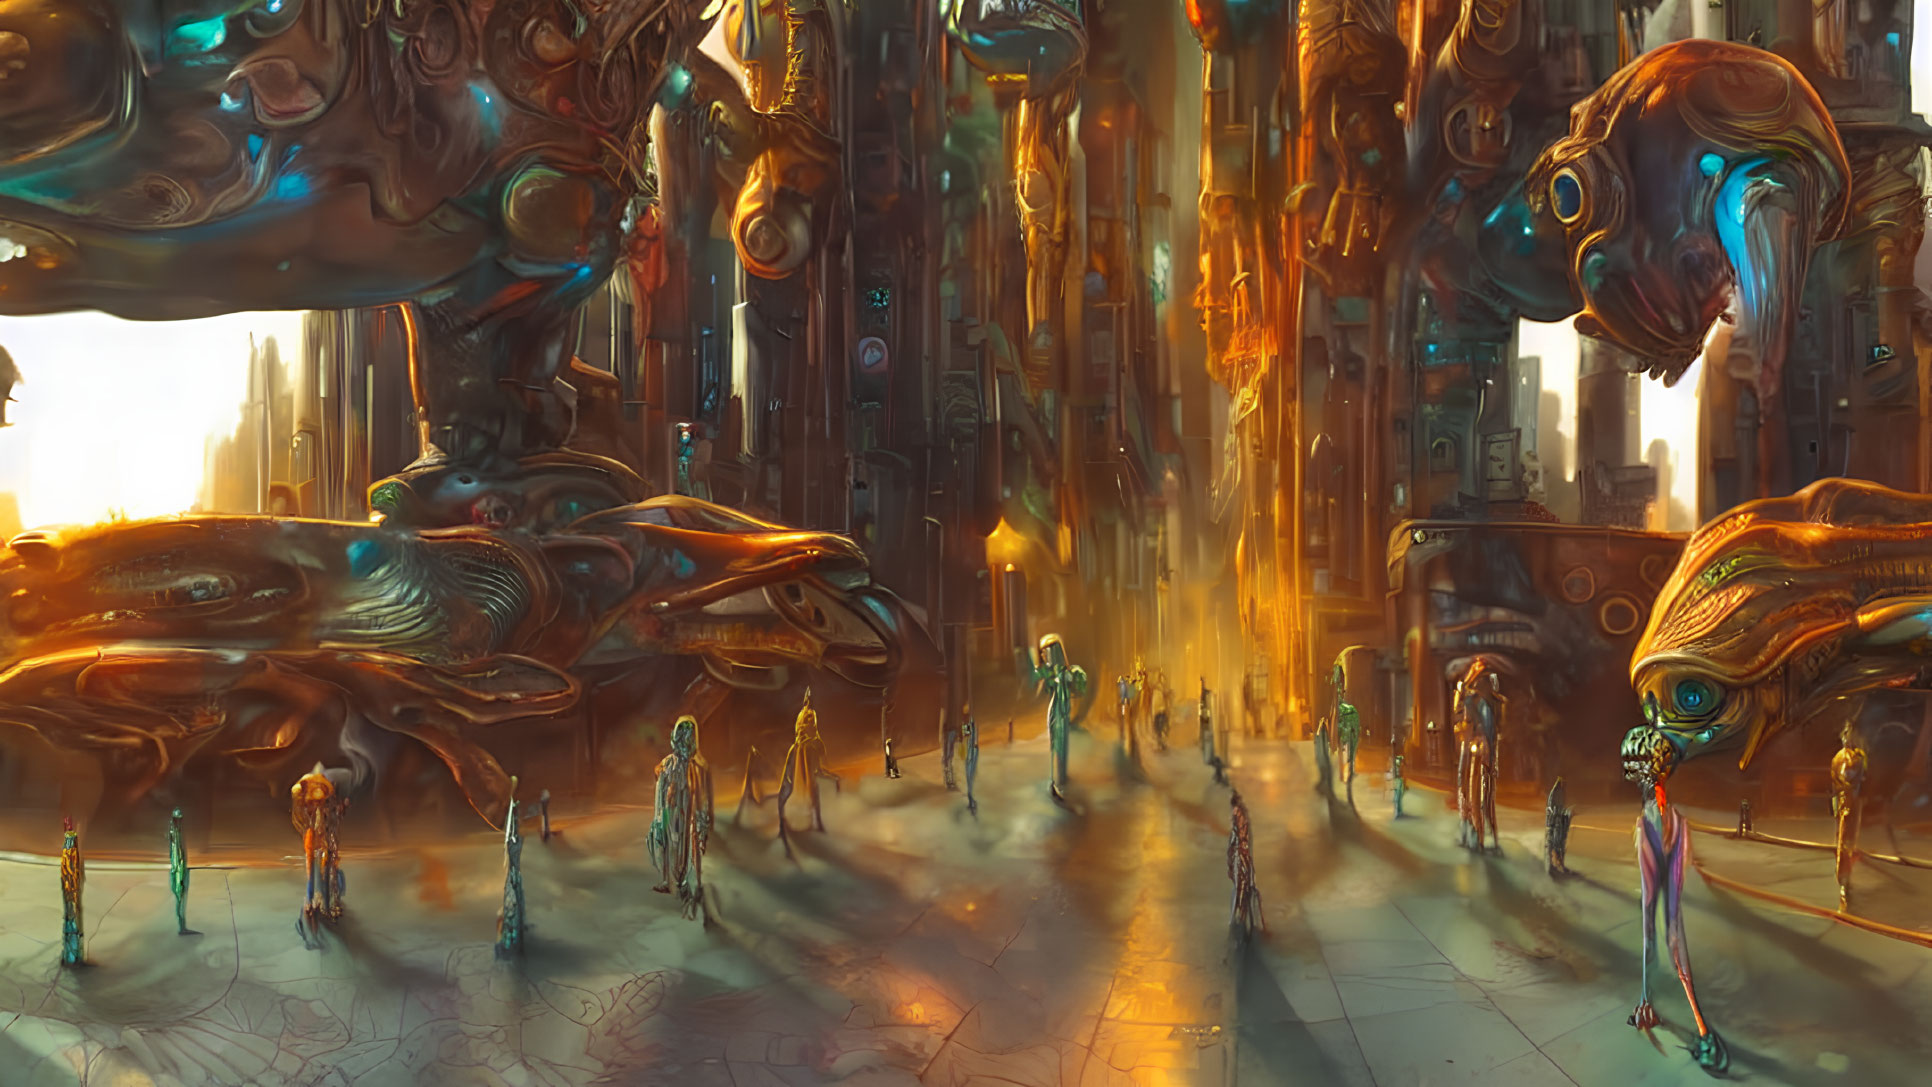 Vibrant futuristic cityscape with organic structures and humanoid figures